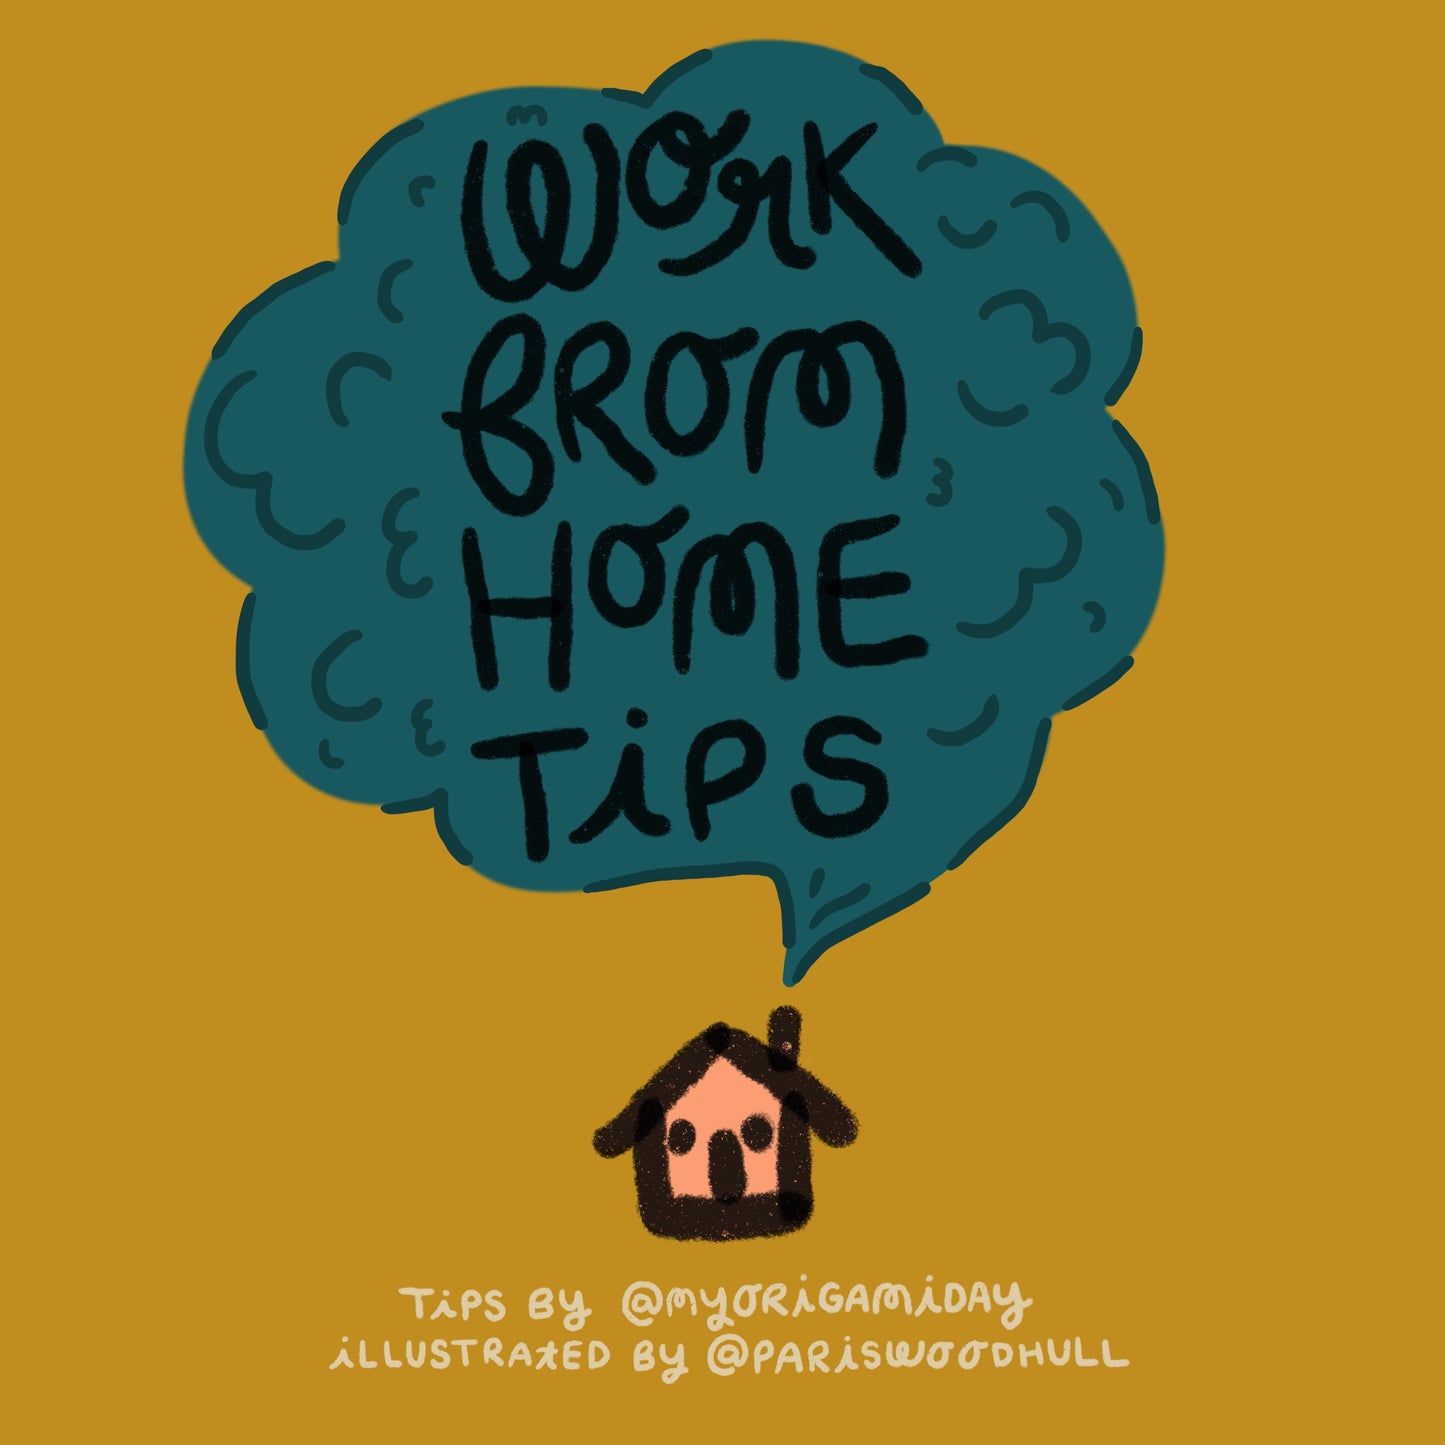 Free Download: Work From Home Digital Tips